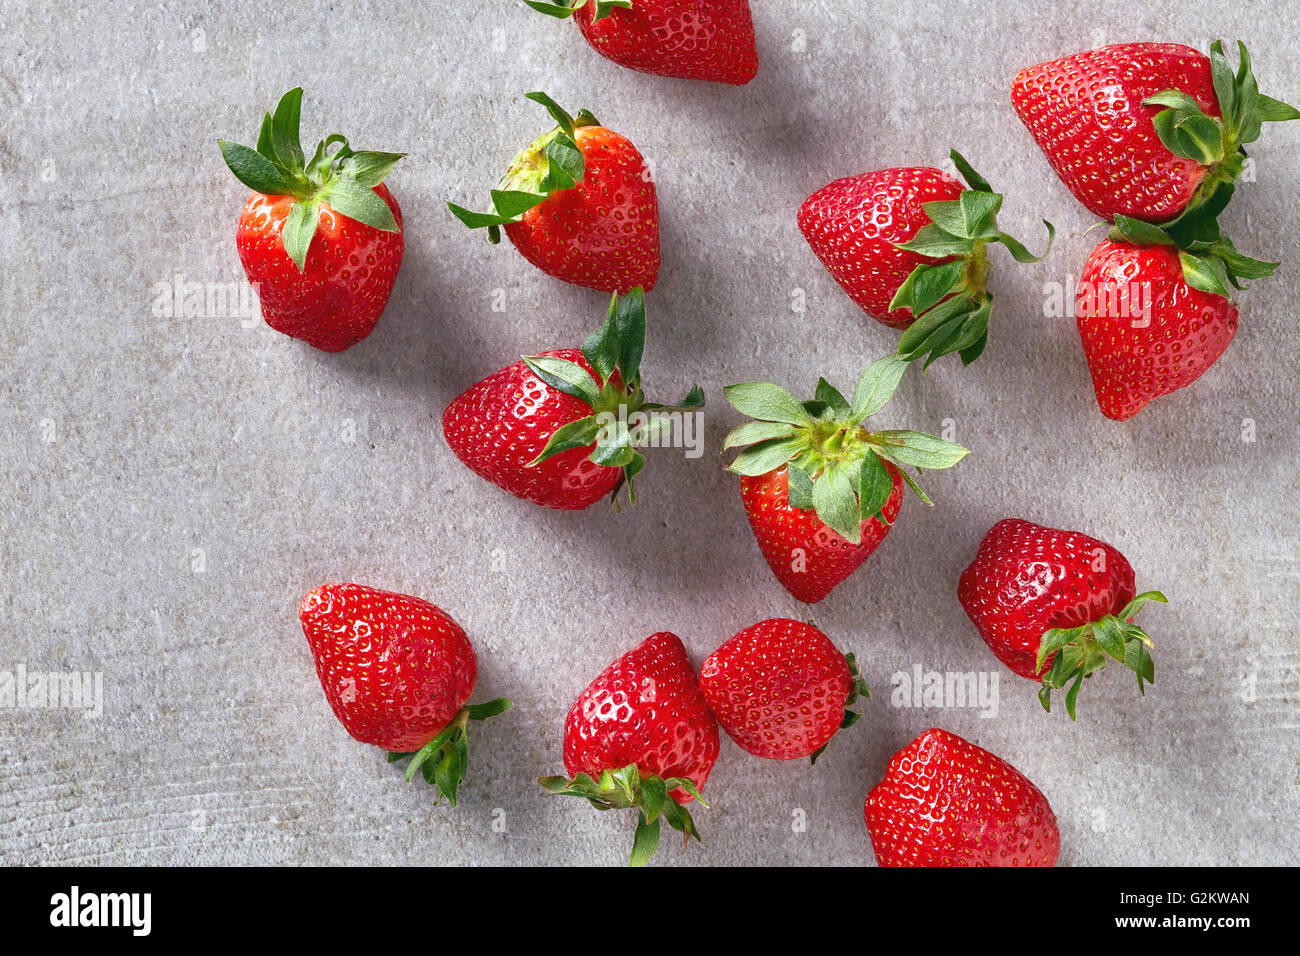 Ripe red strawberries on stone table, top view Stock Photo